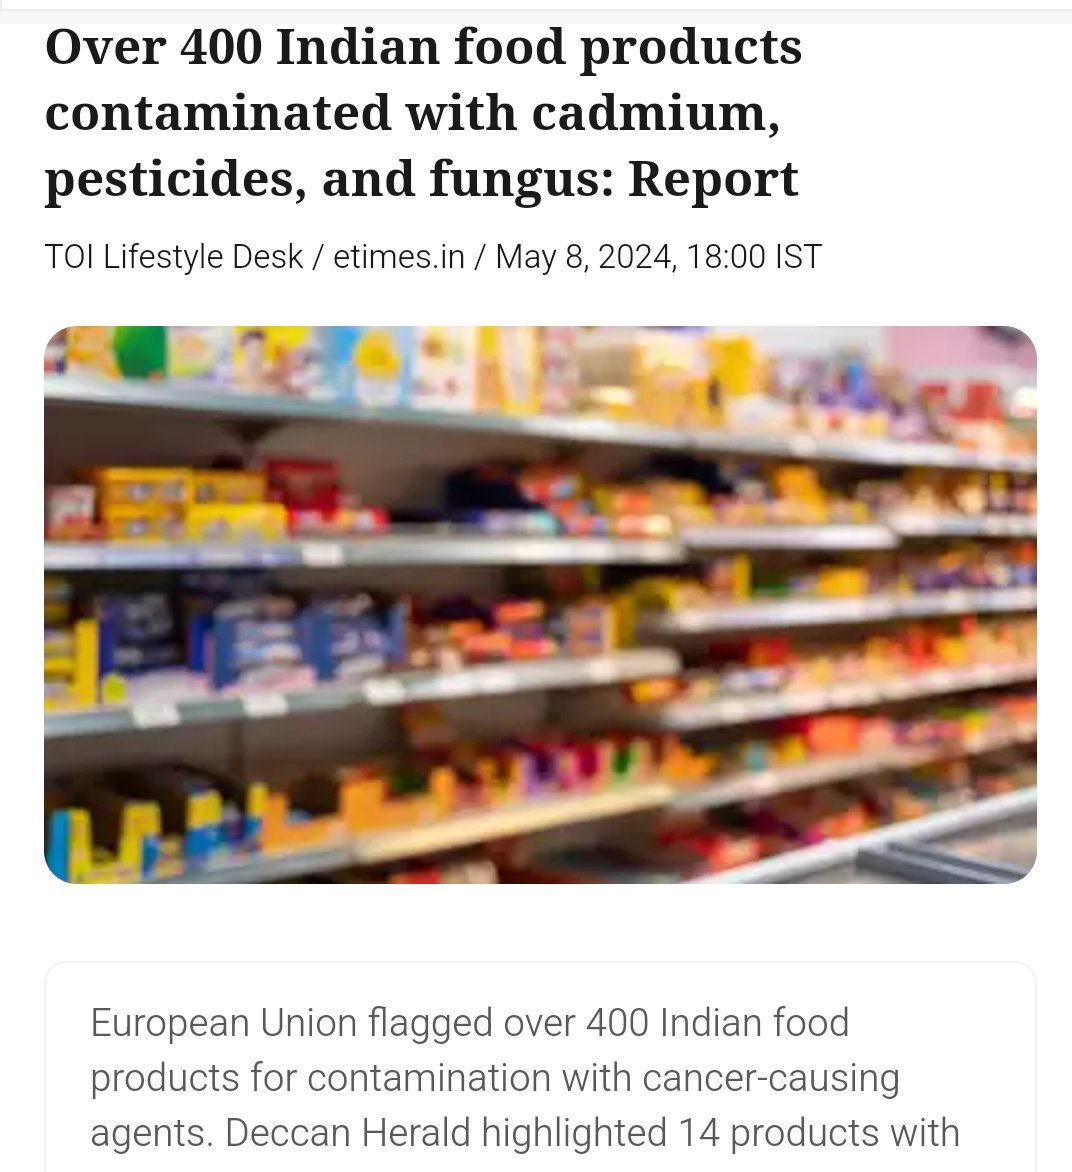 Over 400 Indian food products contaminated with the Cadmium, Pesticides & Fungus 🚨